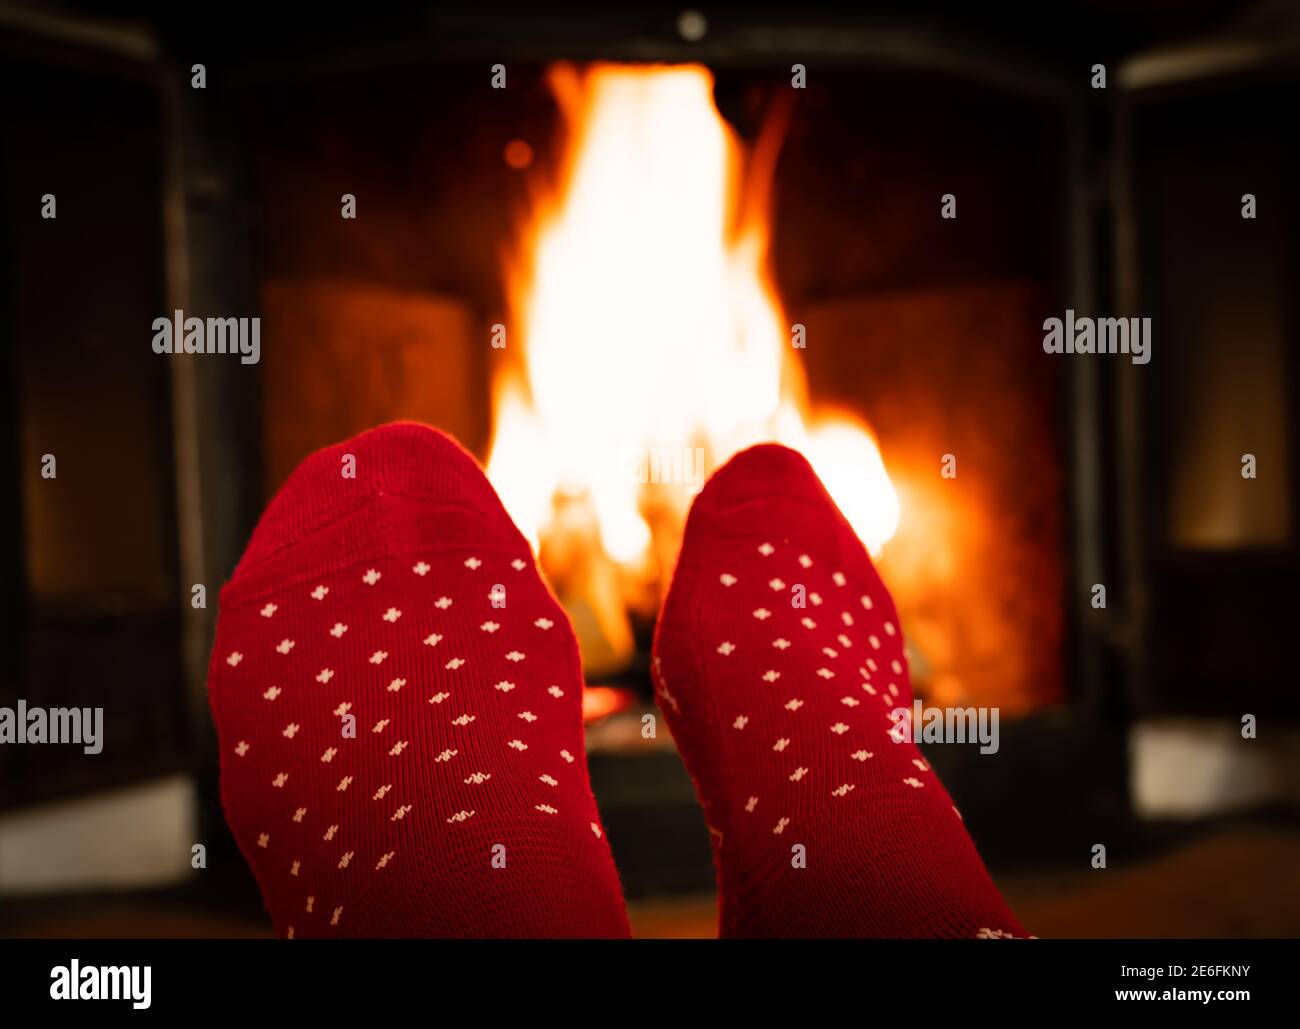 Female feet in red woolen socks by a warm fireplace on a cold winters evening. Stock Photo